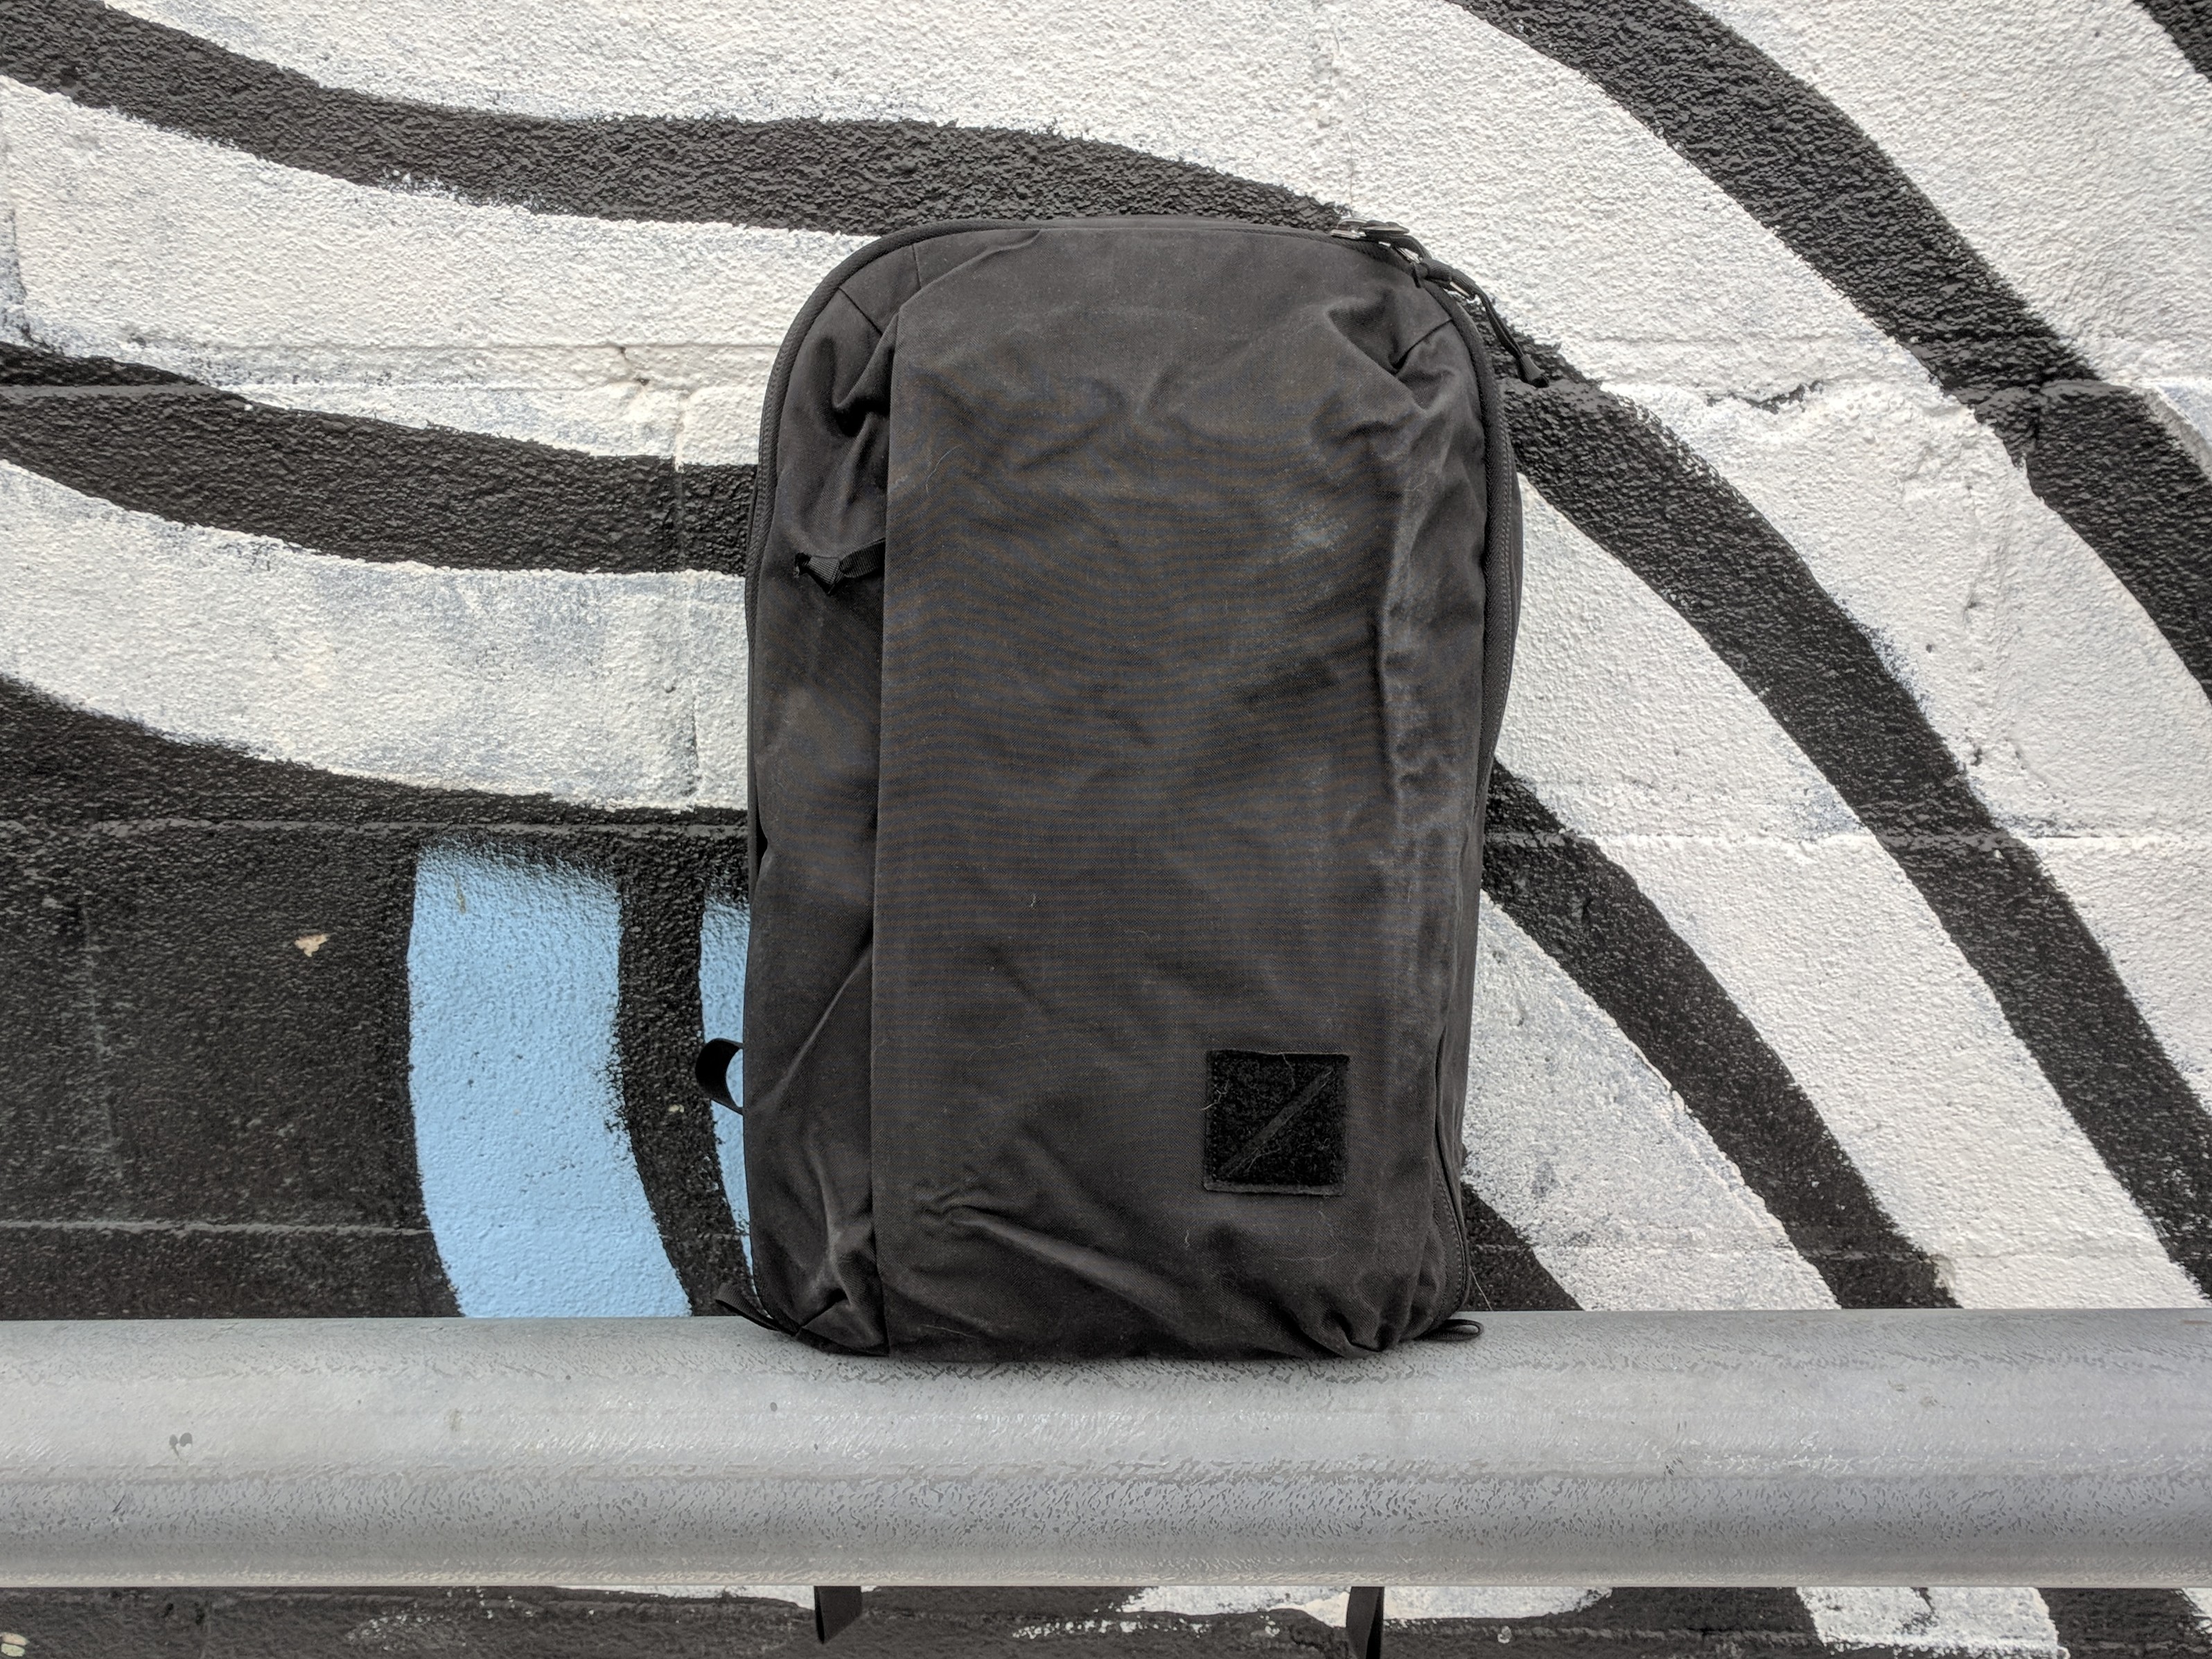 EVERGOODS CPL24 Review - The Perfect Pack